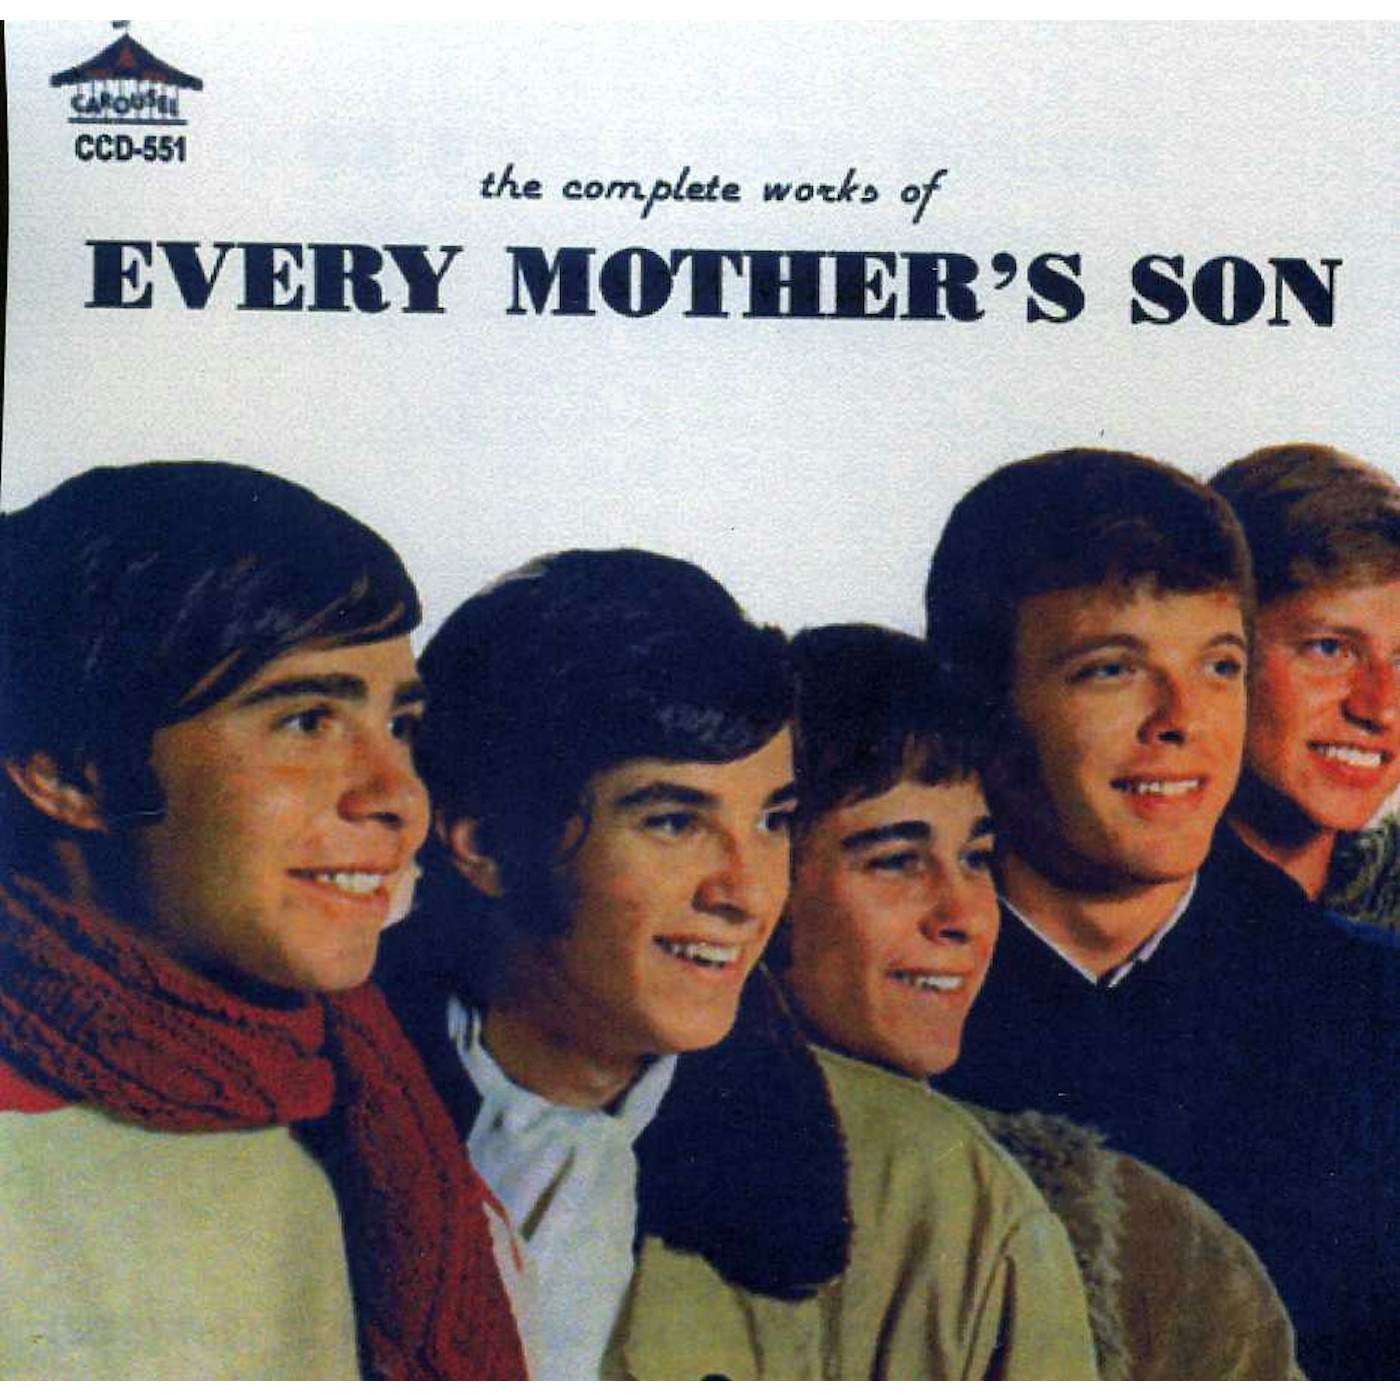 Every Mother's Son COMPLETE WORKS CD